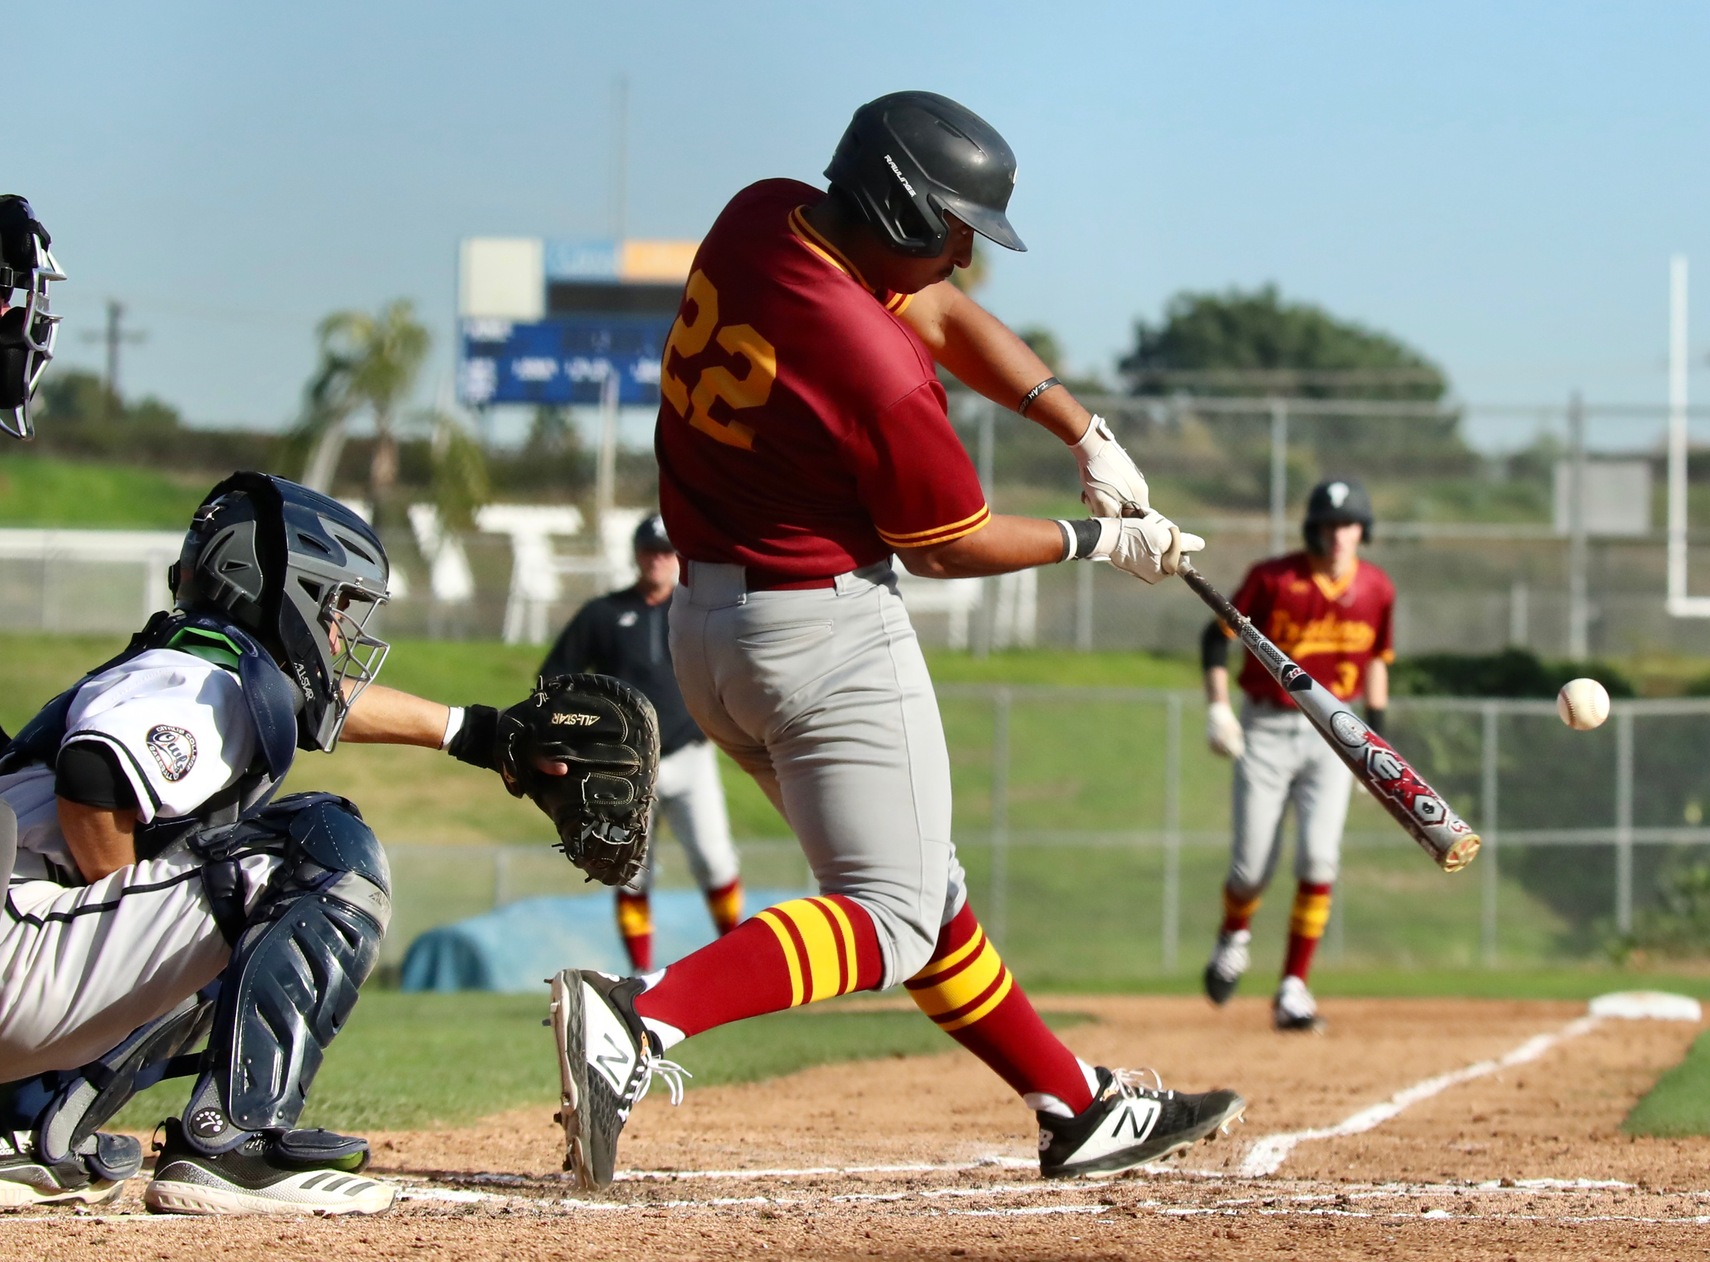 Marco Martinez opens the 2020 PCC baseball season with a grand slam HR on this swing at Citrus College on Friday, photo by Michael Watkins.